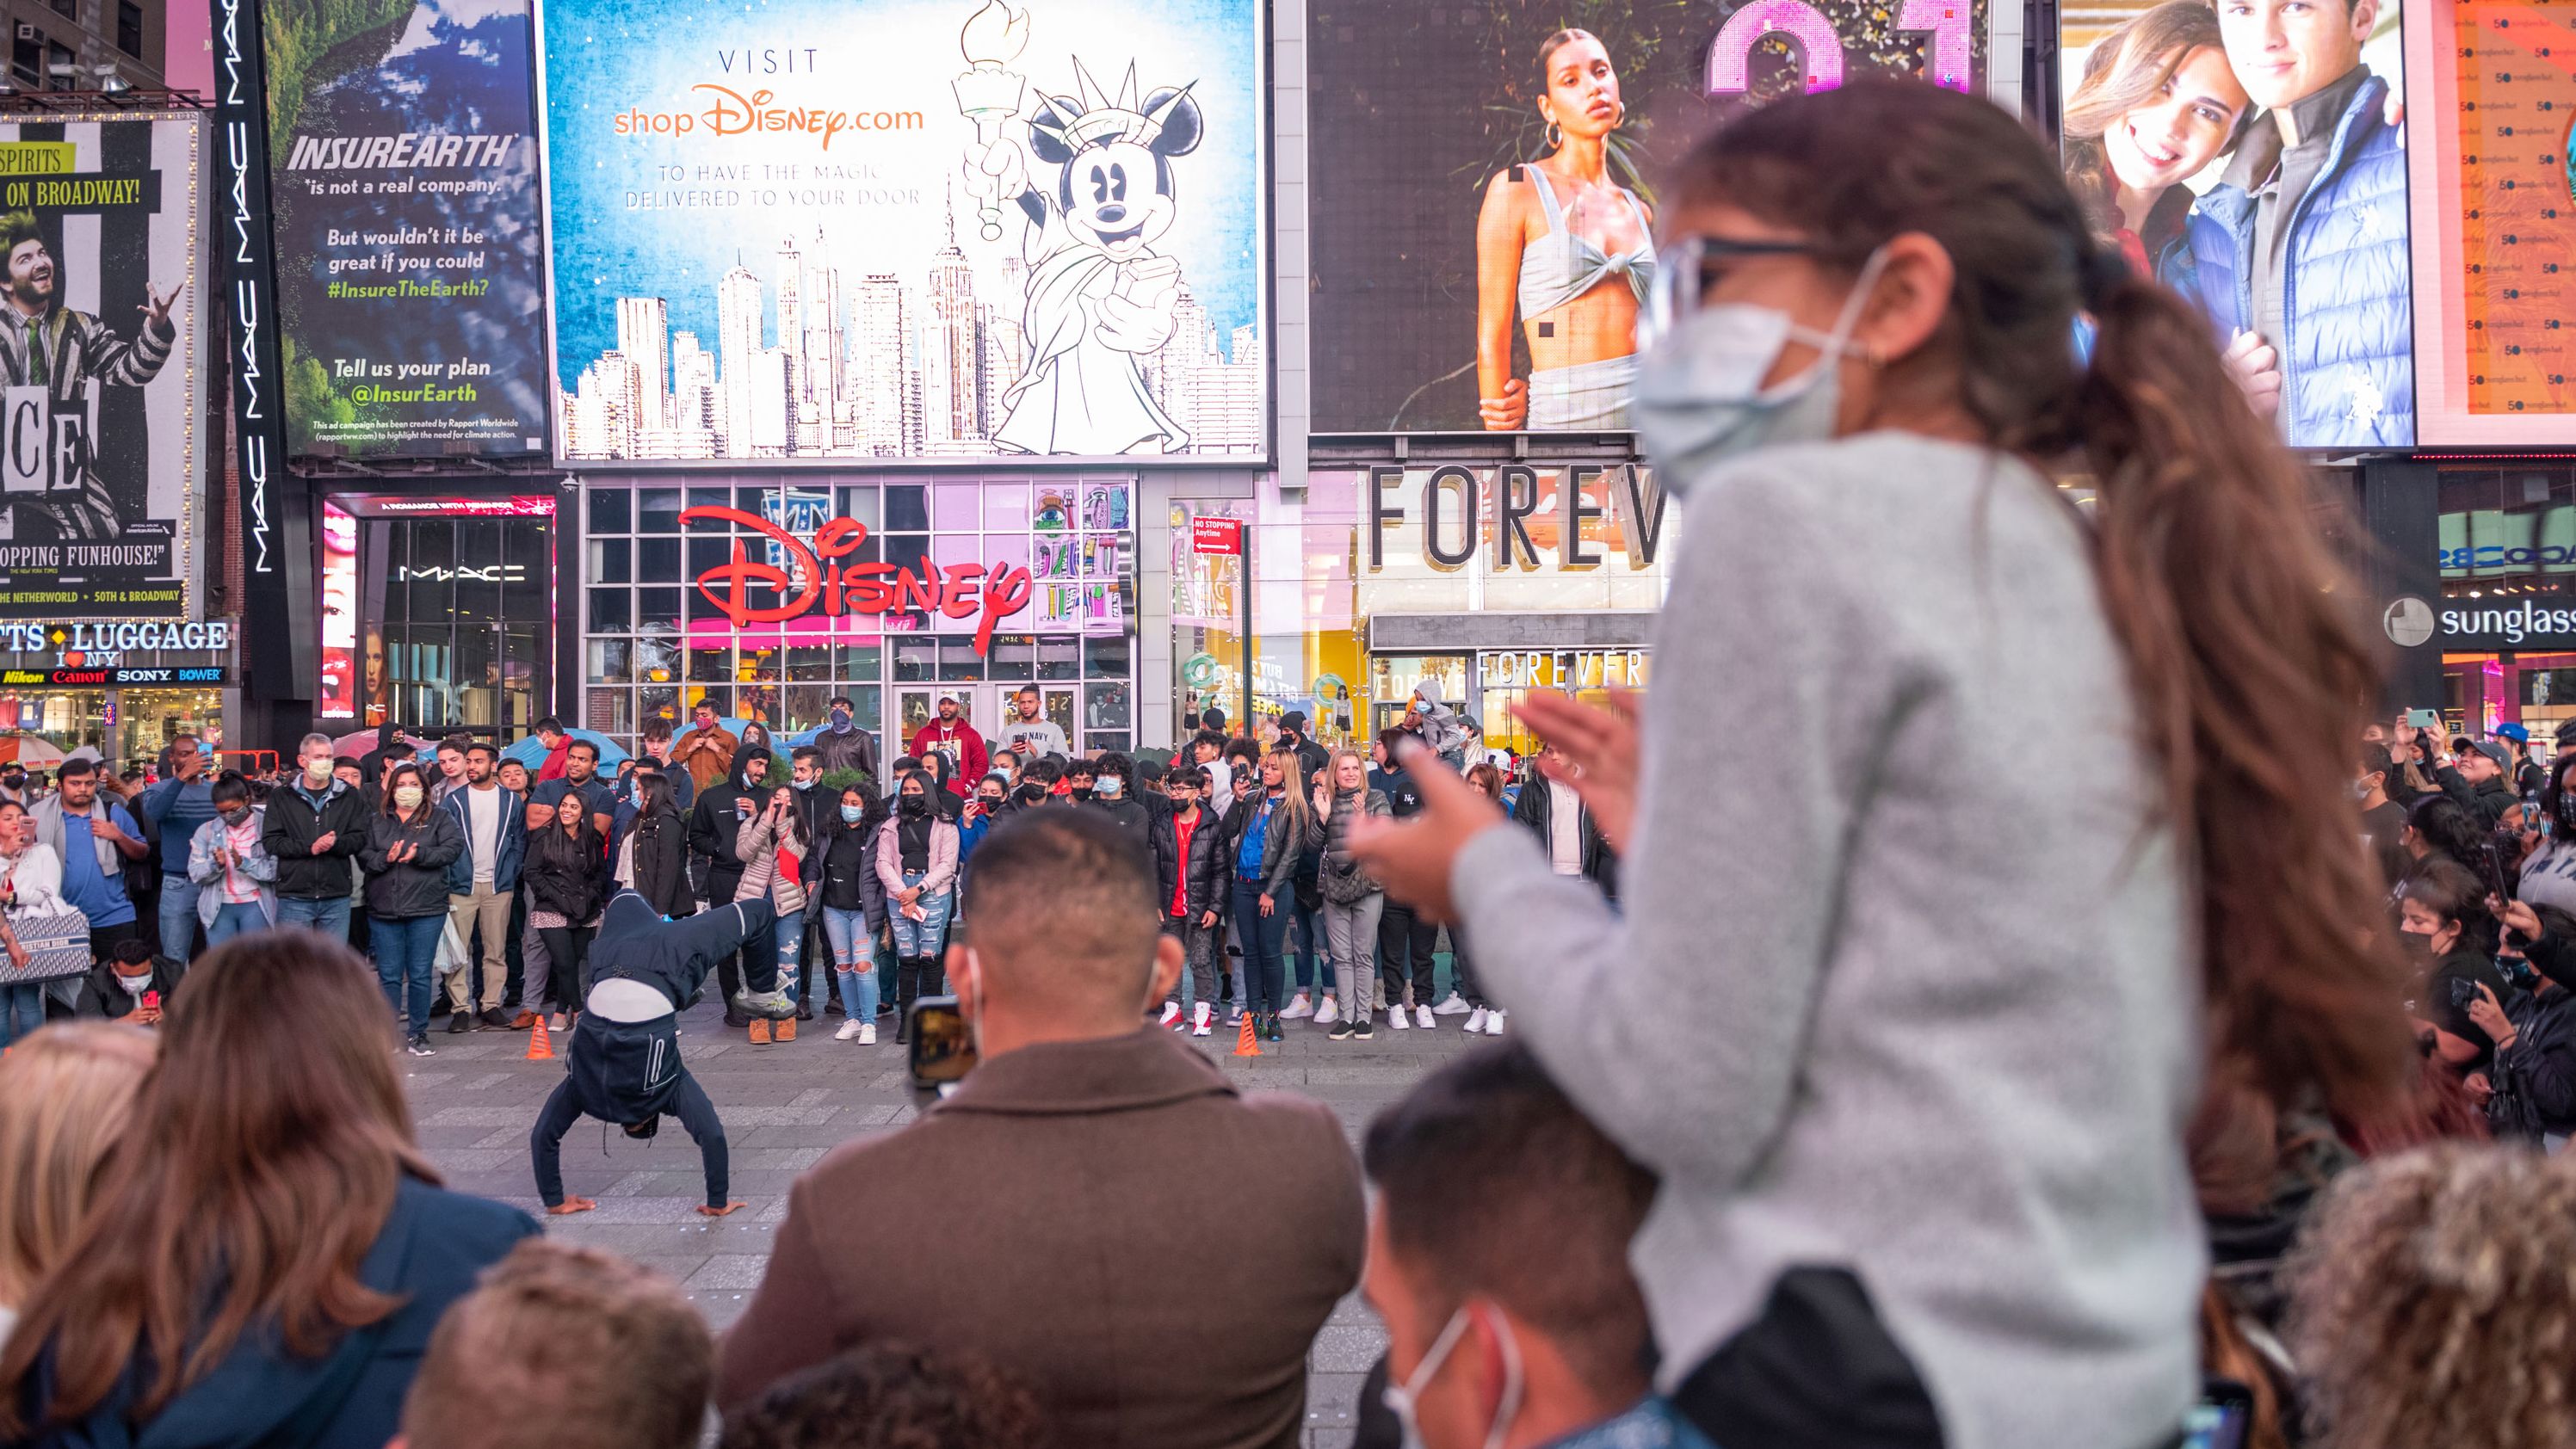 A large crowd gathers to watch a street performance in New York's Times Square on Saturday.